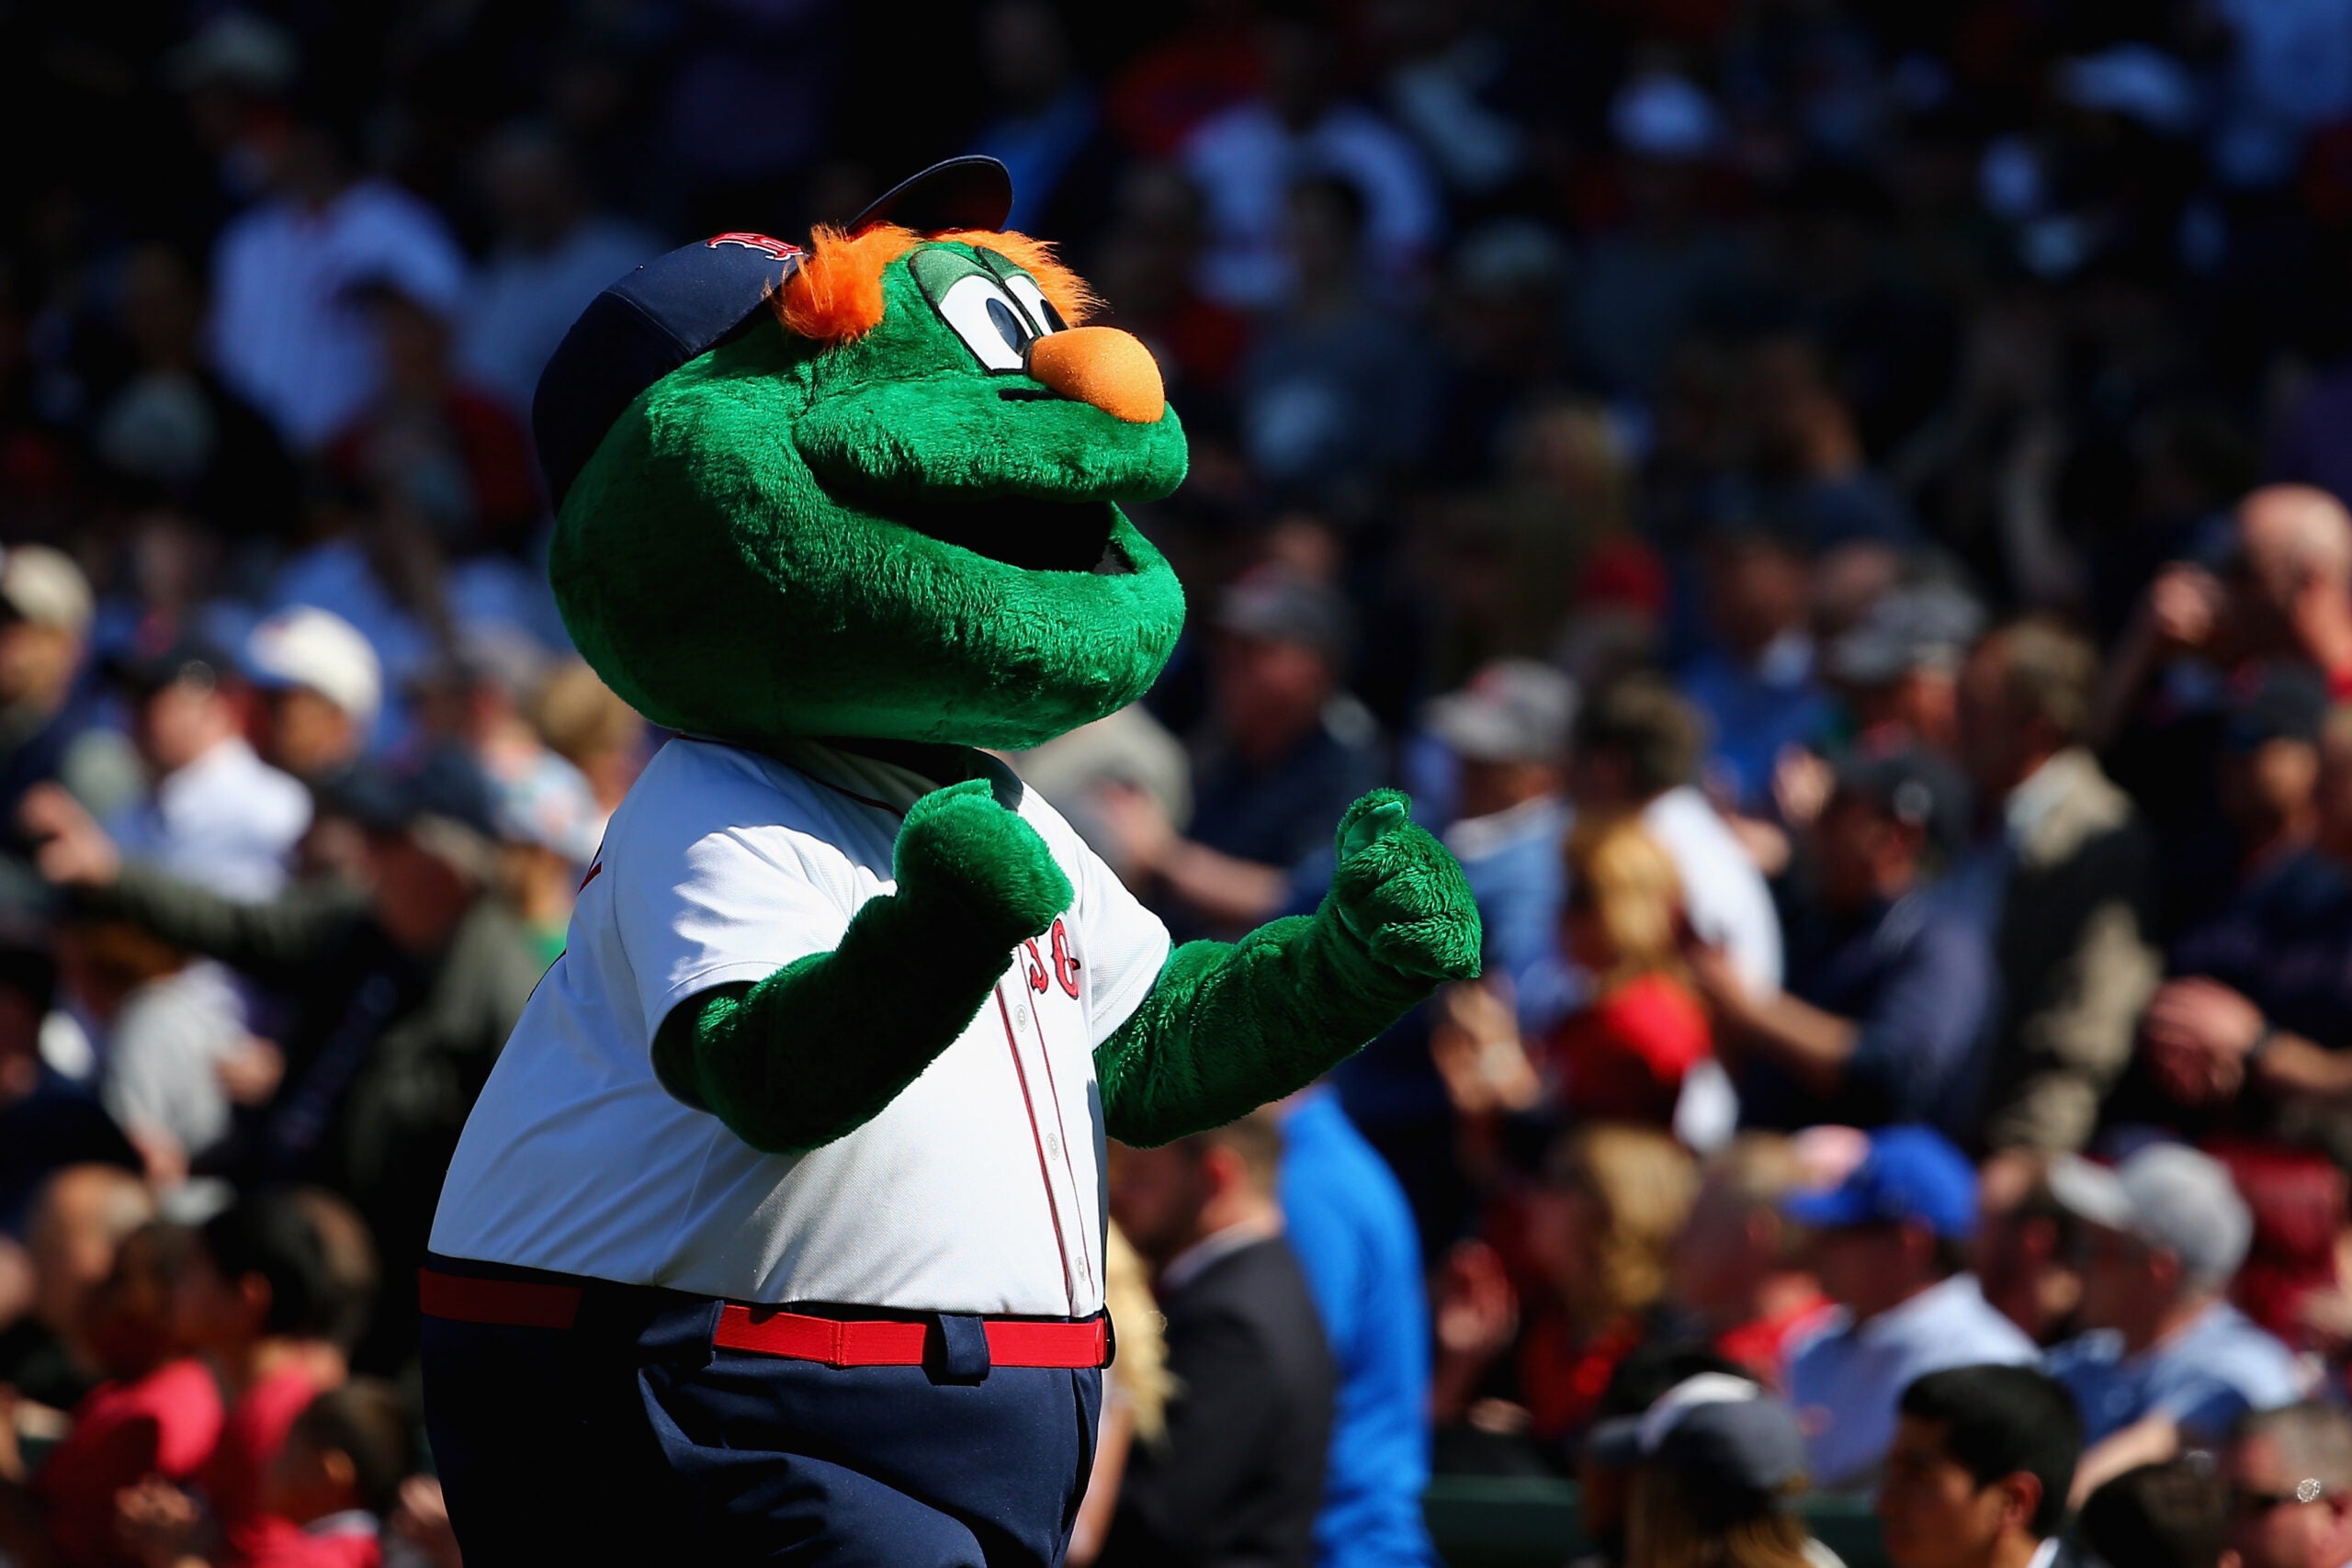 Wally the Green Monster Feuded With Mr. Met, But Apparently They're Buds  Again